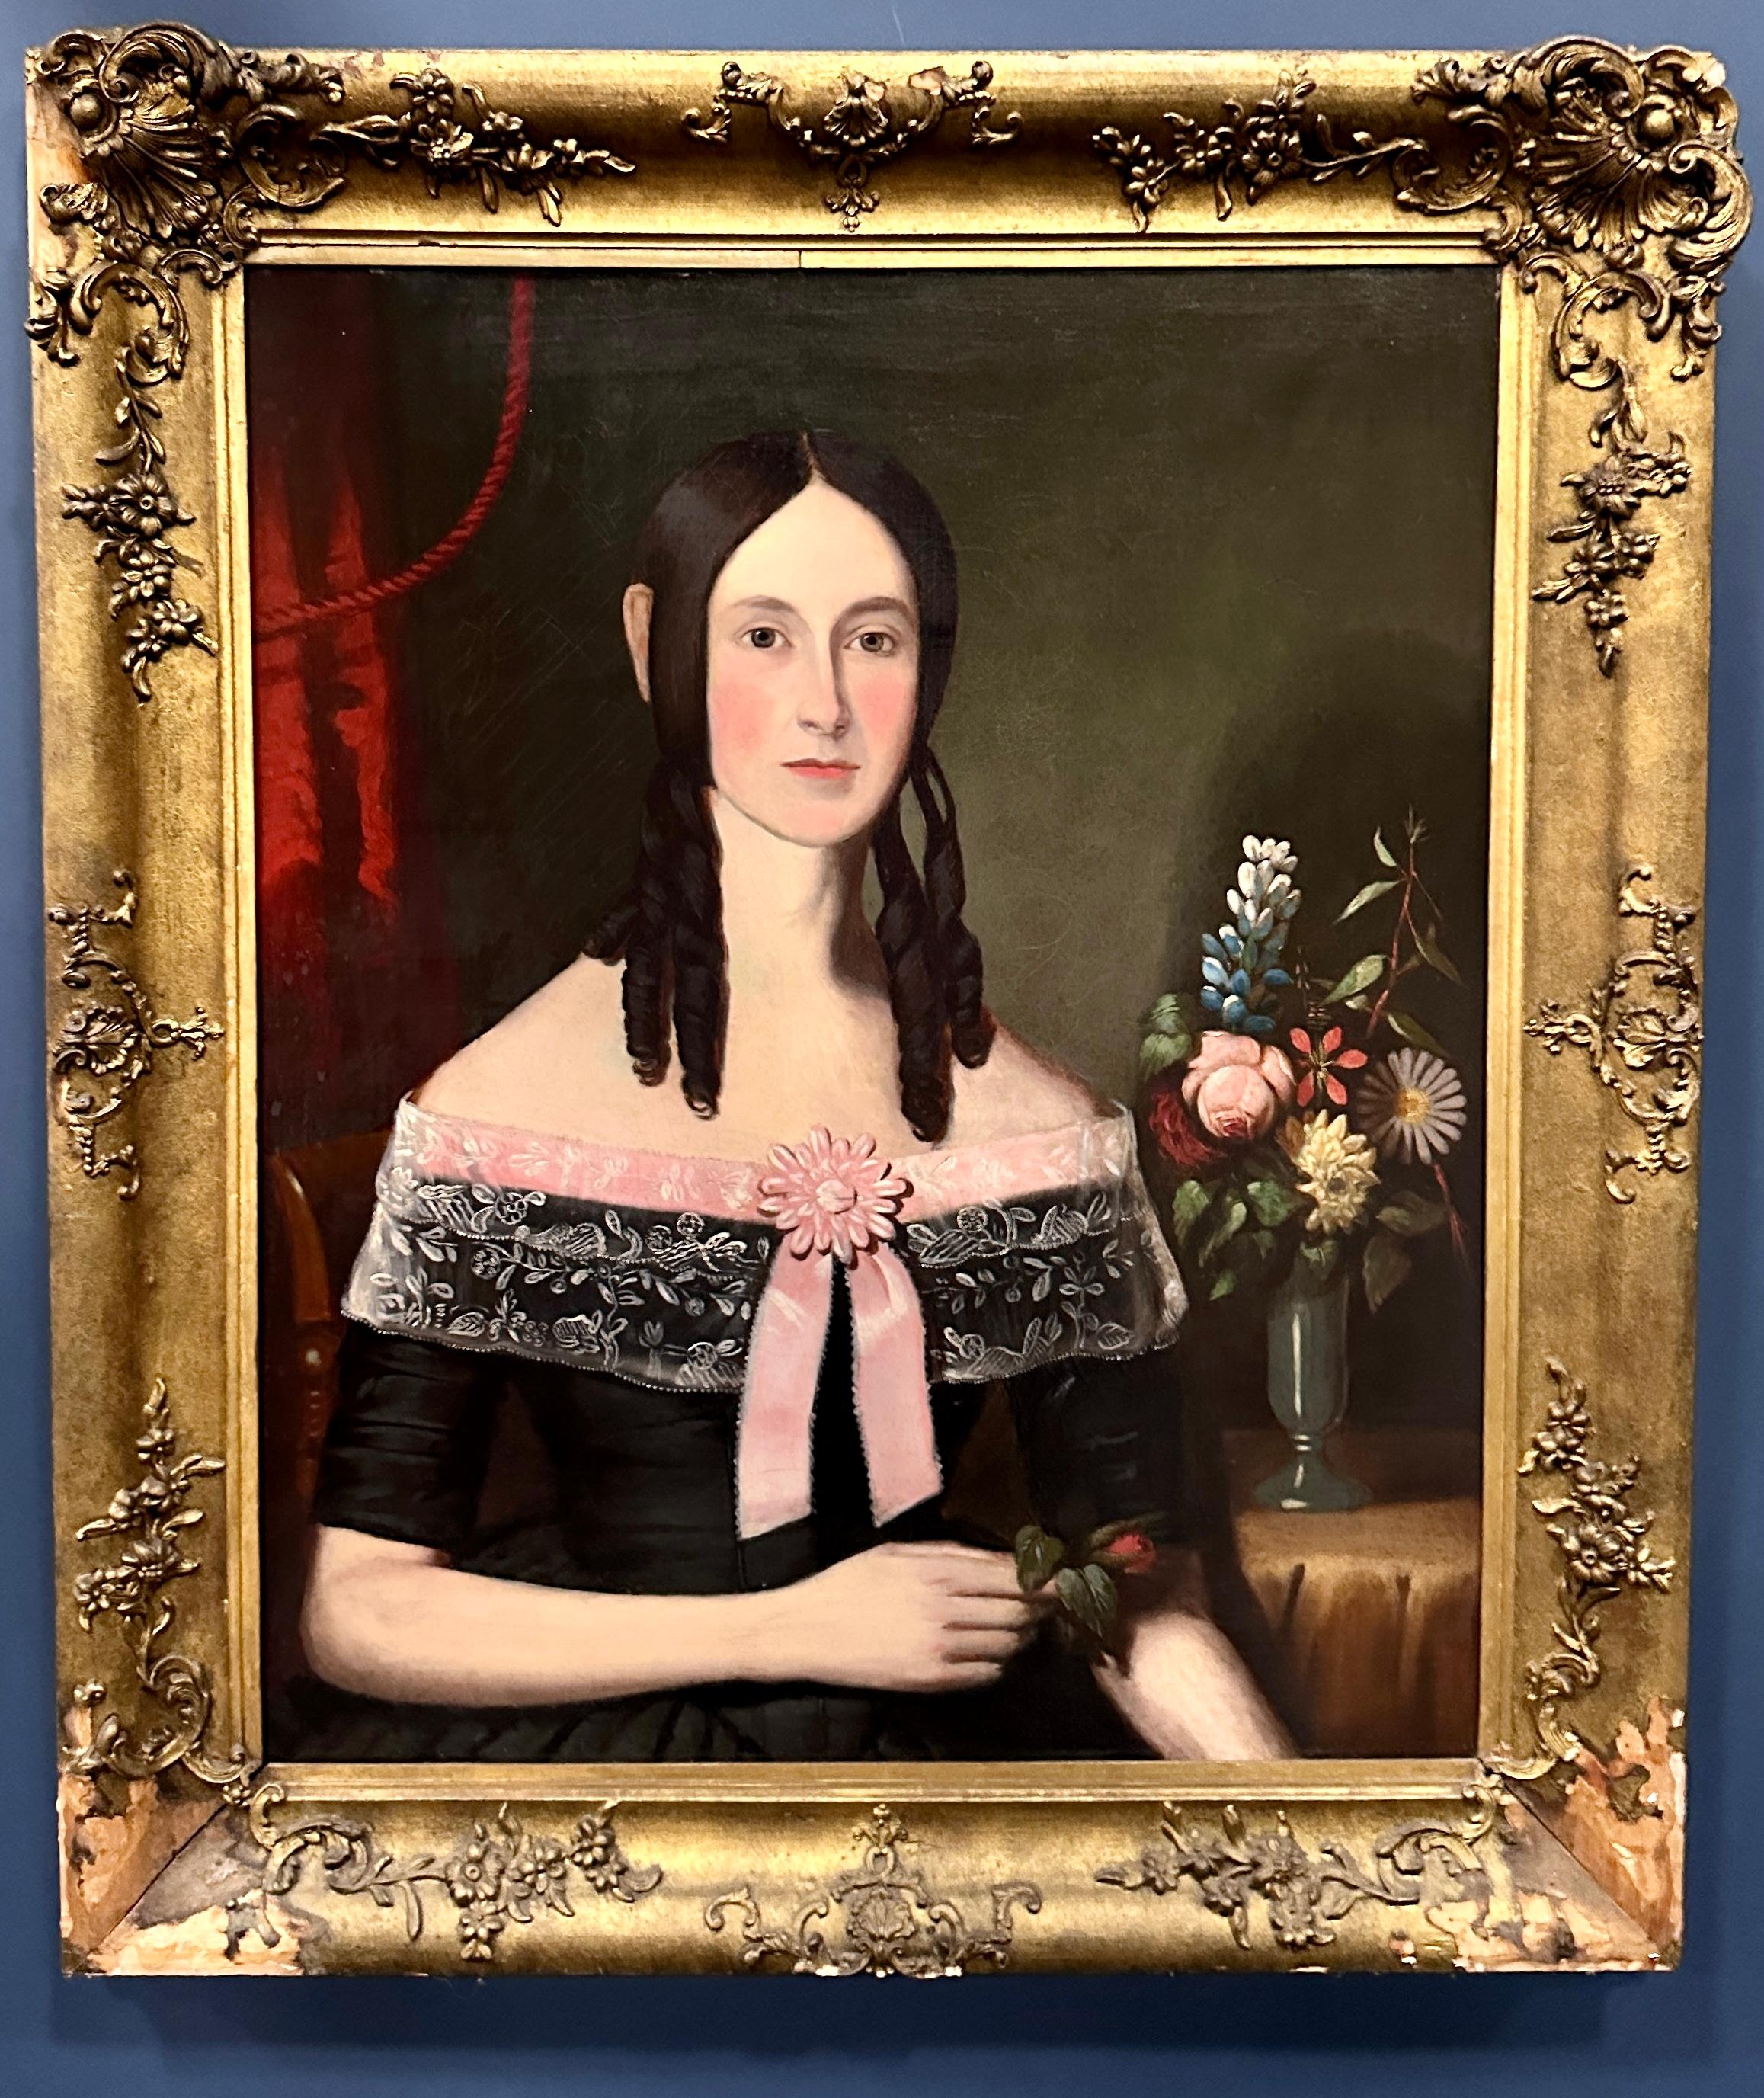 Very Interesting 19th century Folk art painting of a young woman. 

Classic American Folk art style portrait

Circa 1850-60

Oils on canvas

Original frame, with a little damage.

Possibly from the North East, Or New England

Previously from a